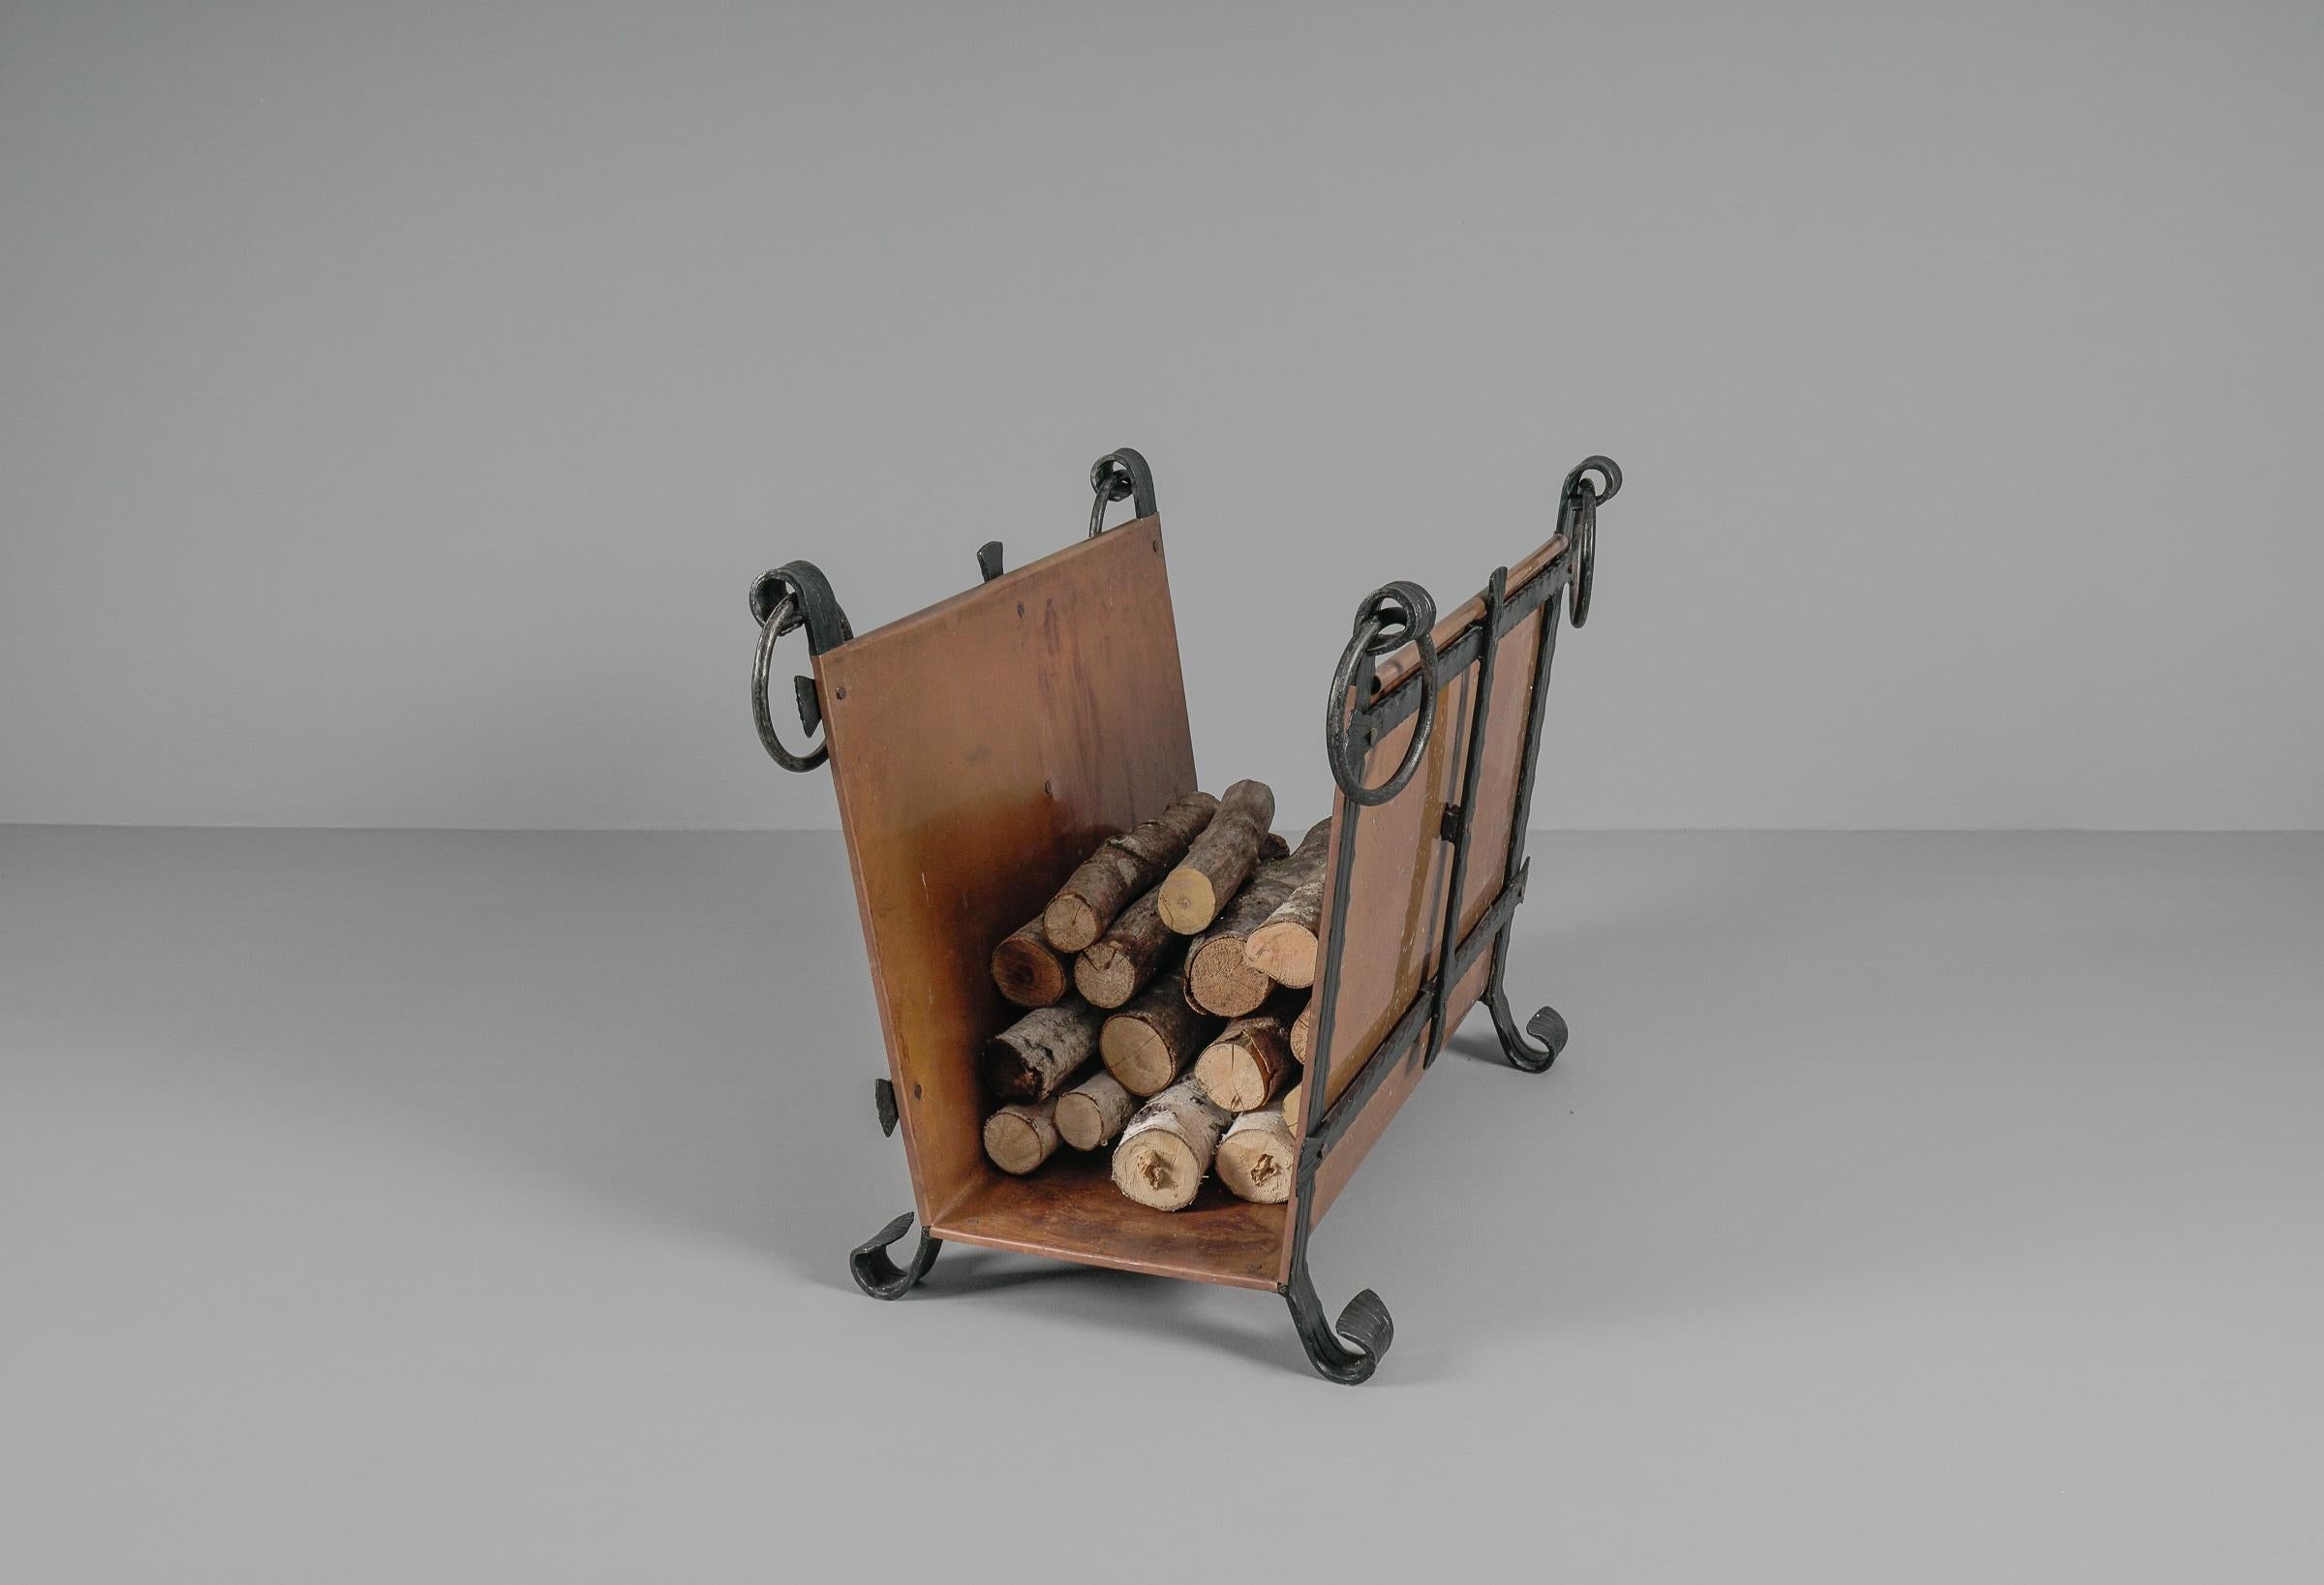 German Unique Handmade Wrought Iron and Copper Firewood Holder, 1970s, Italy